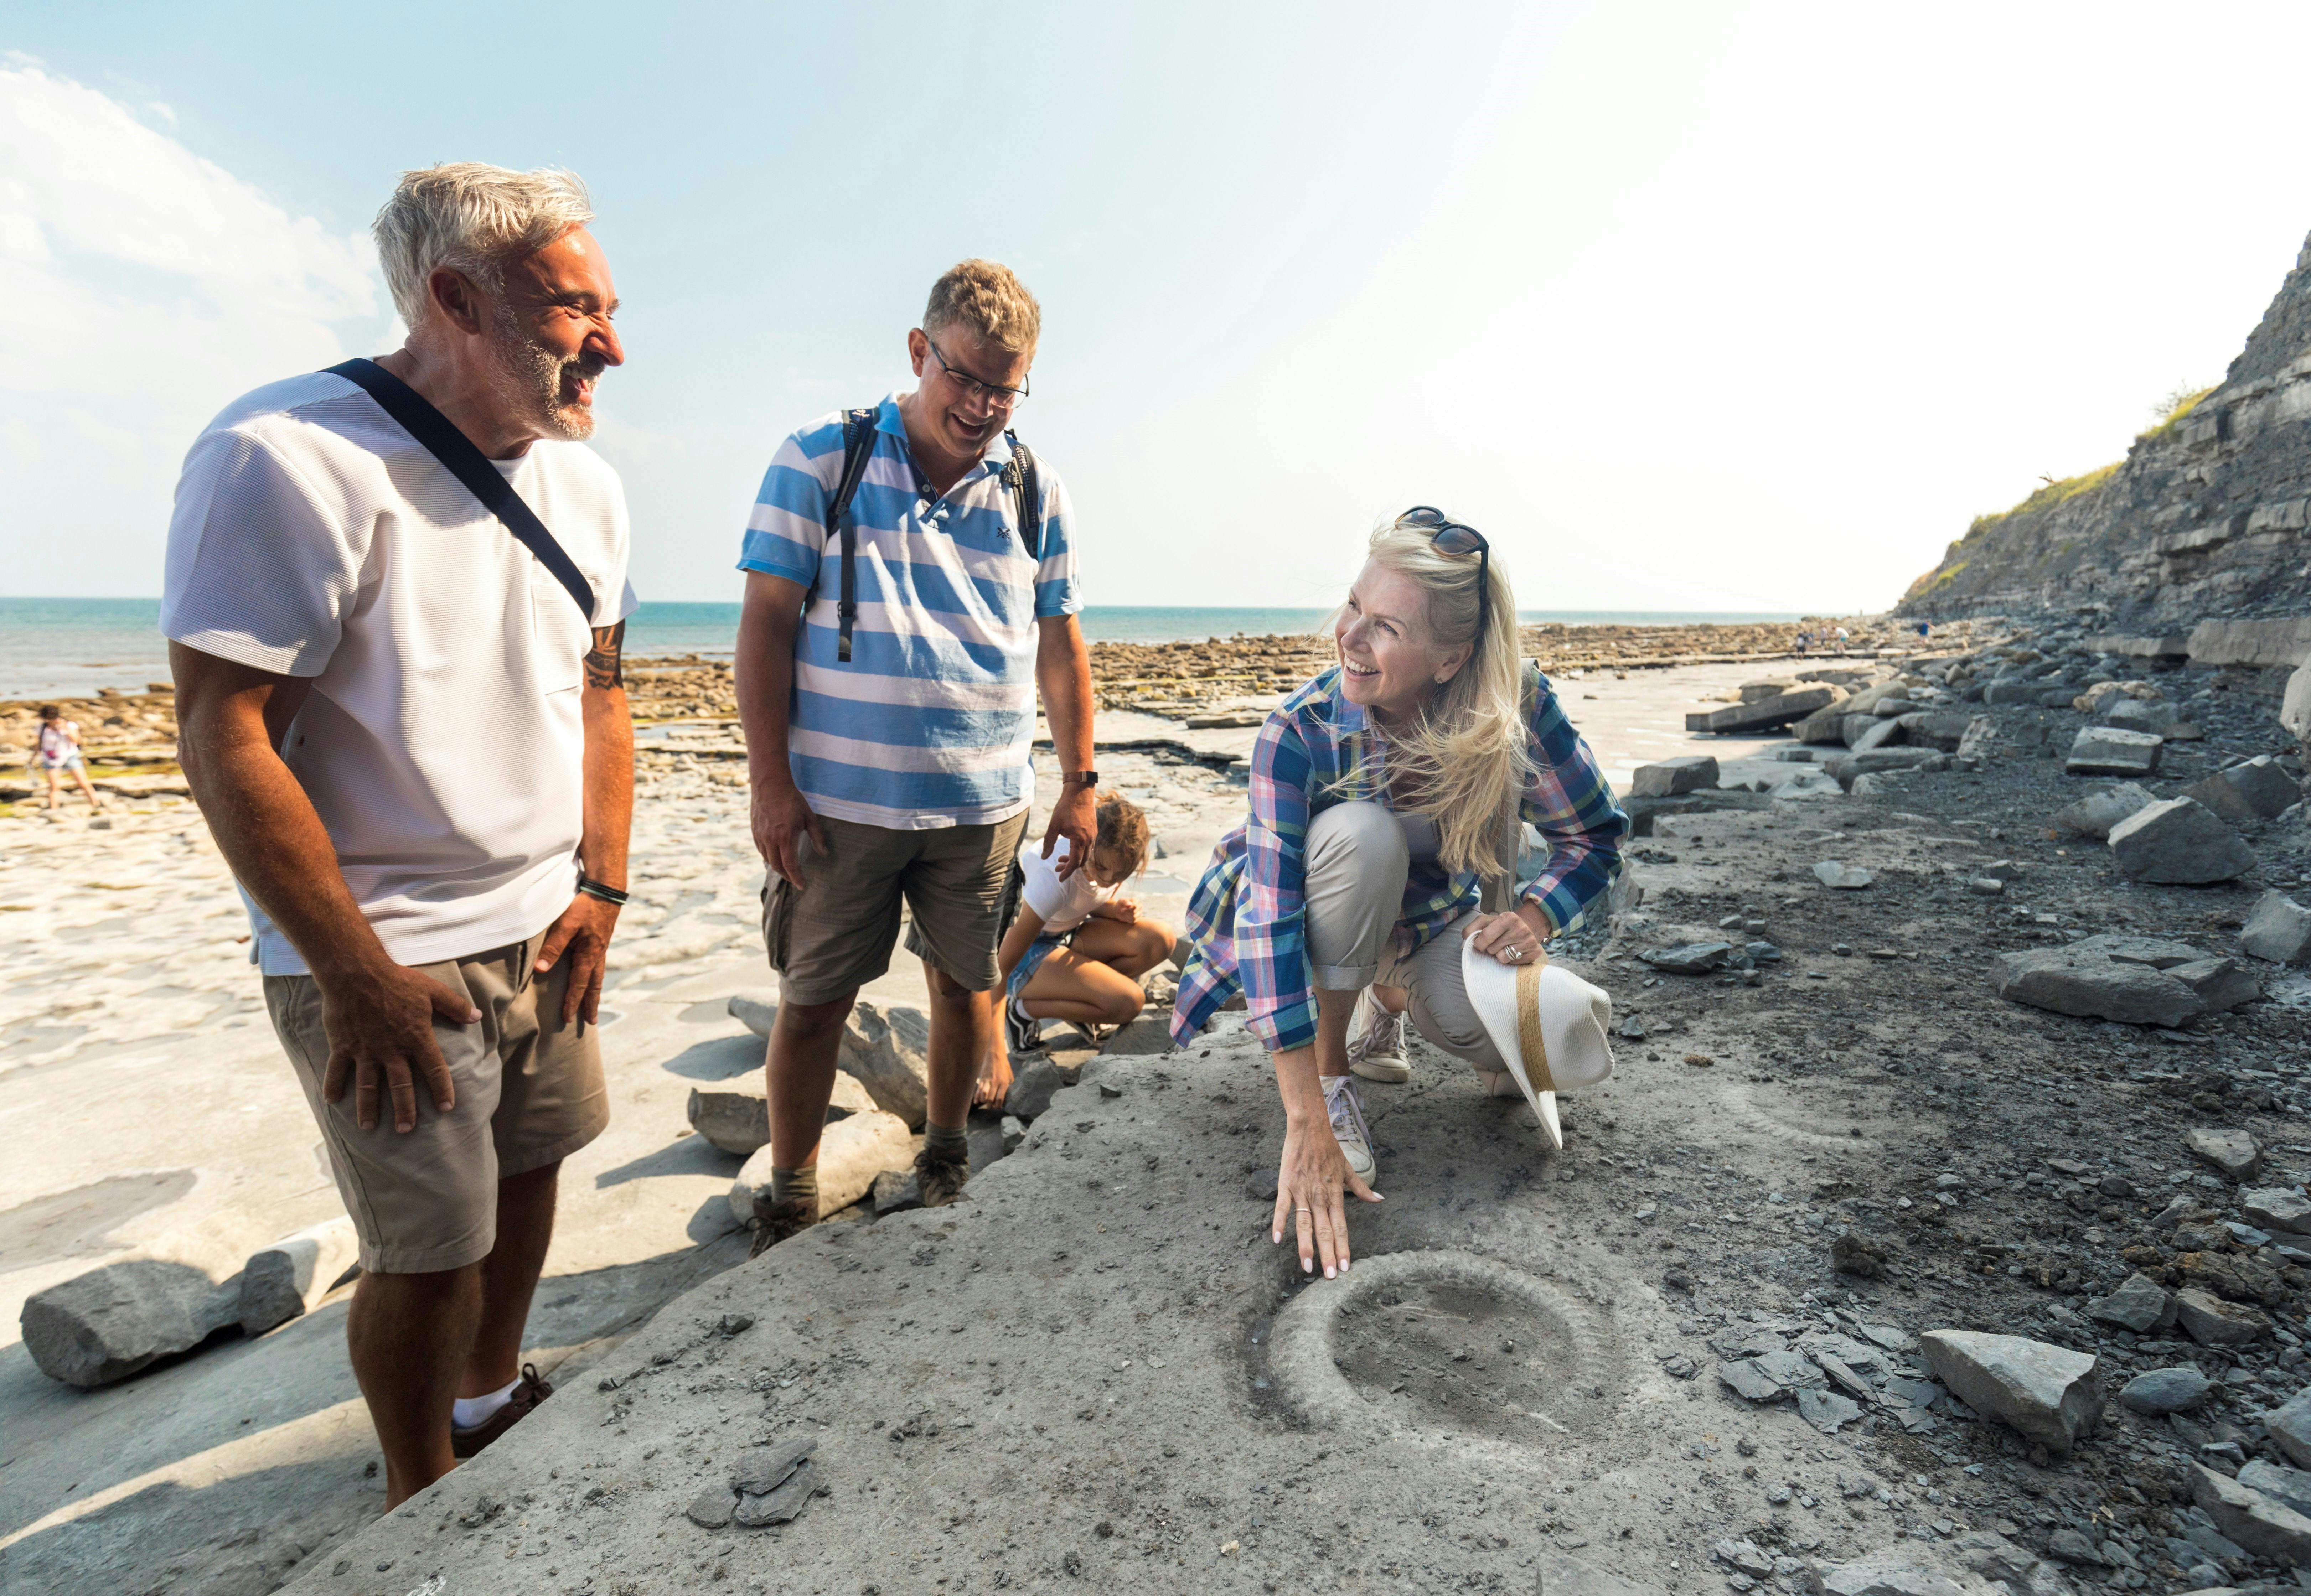 People gathered around an uncovered fossil on Lyme Regis beach